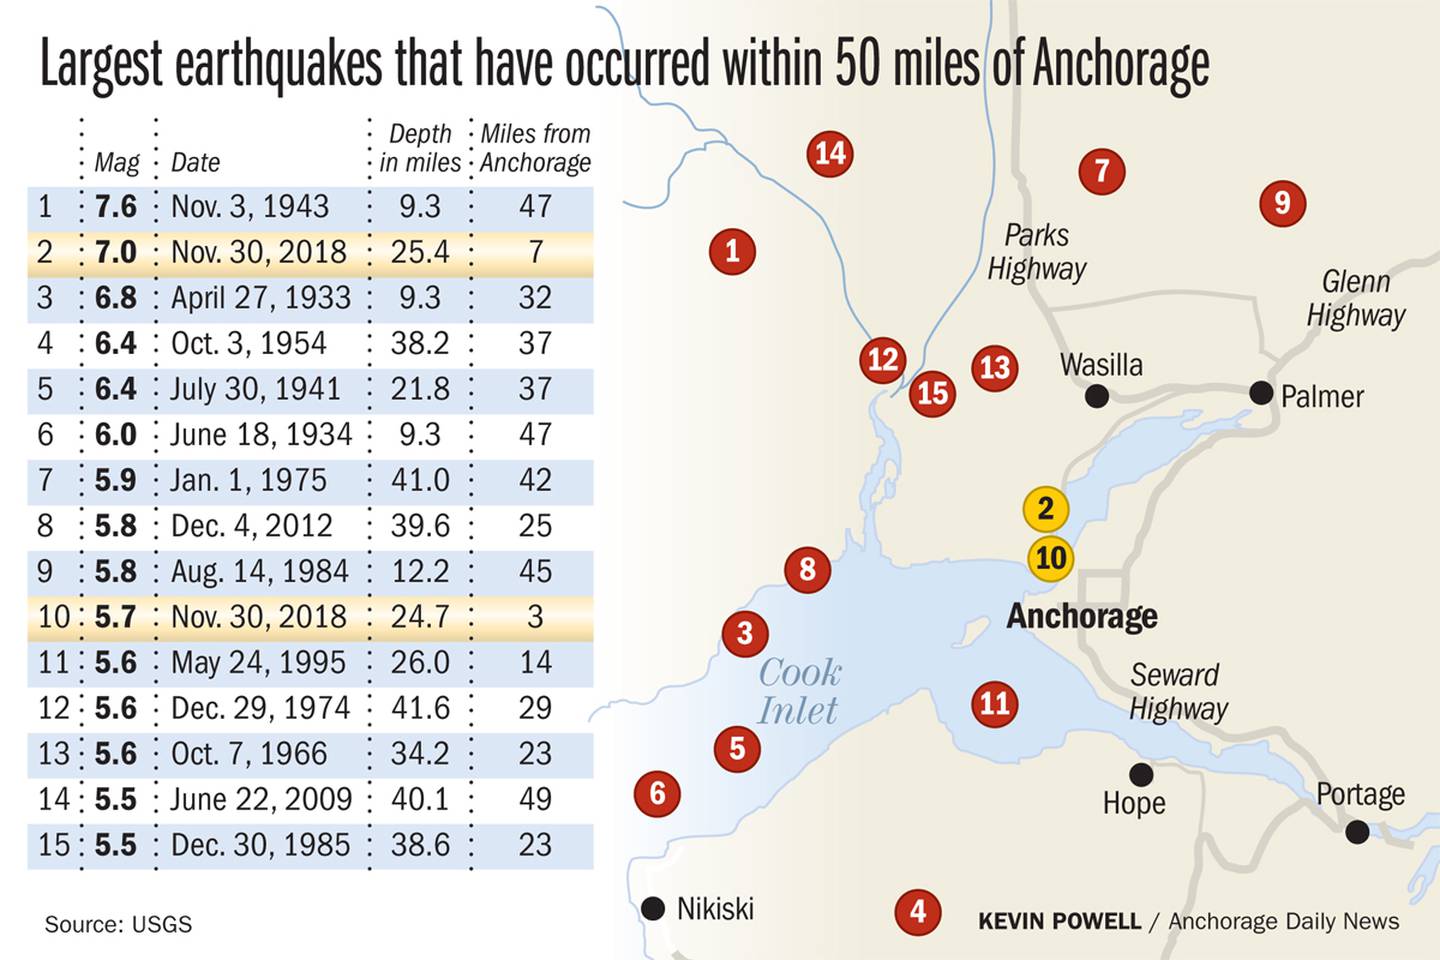 Largest Earthquakes that have occurred with 50 miles of Anchorage